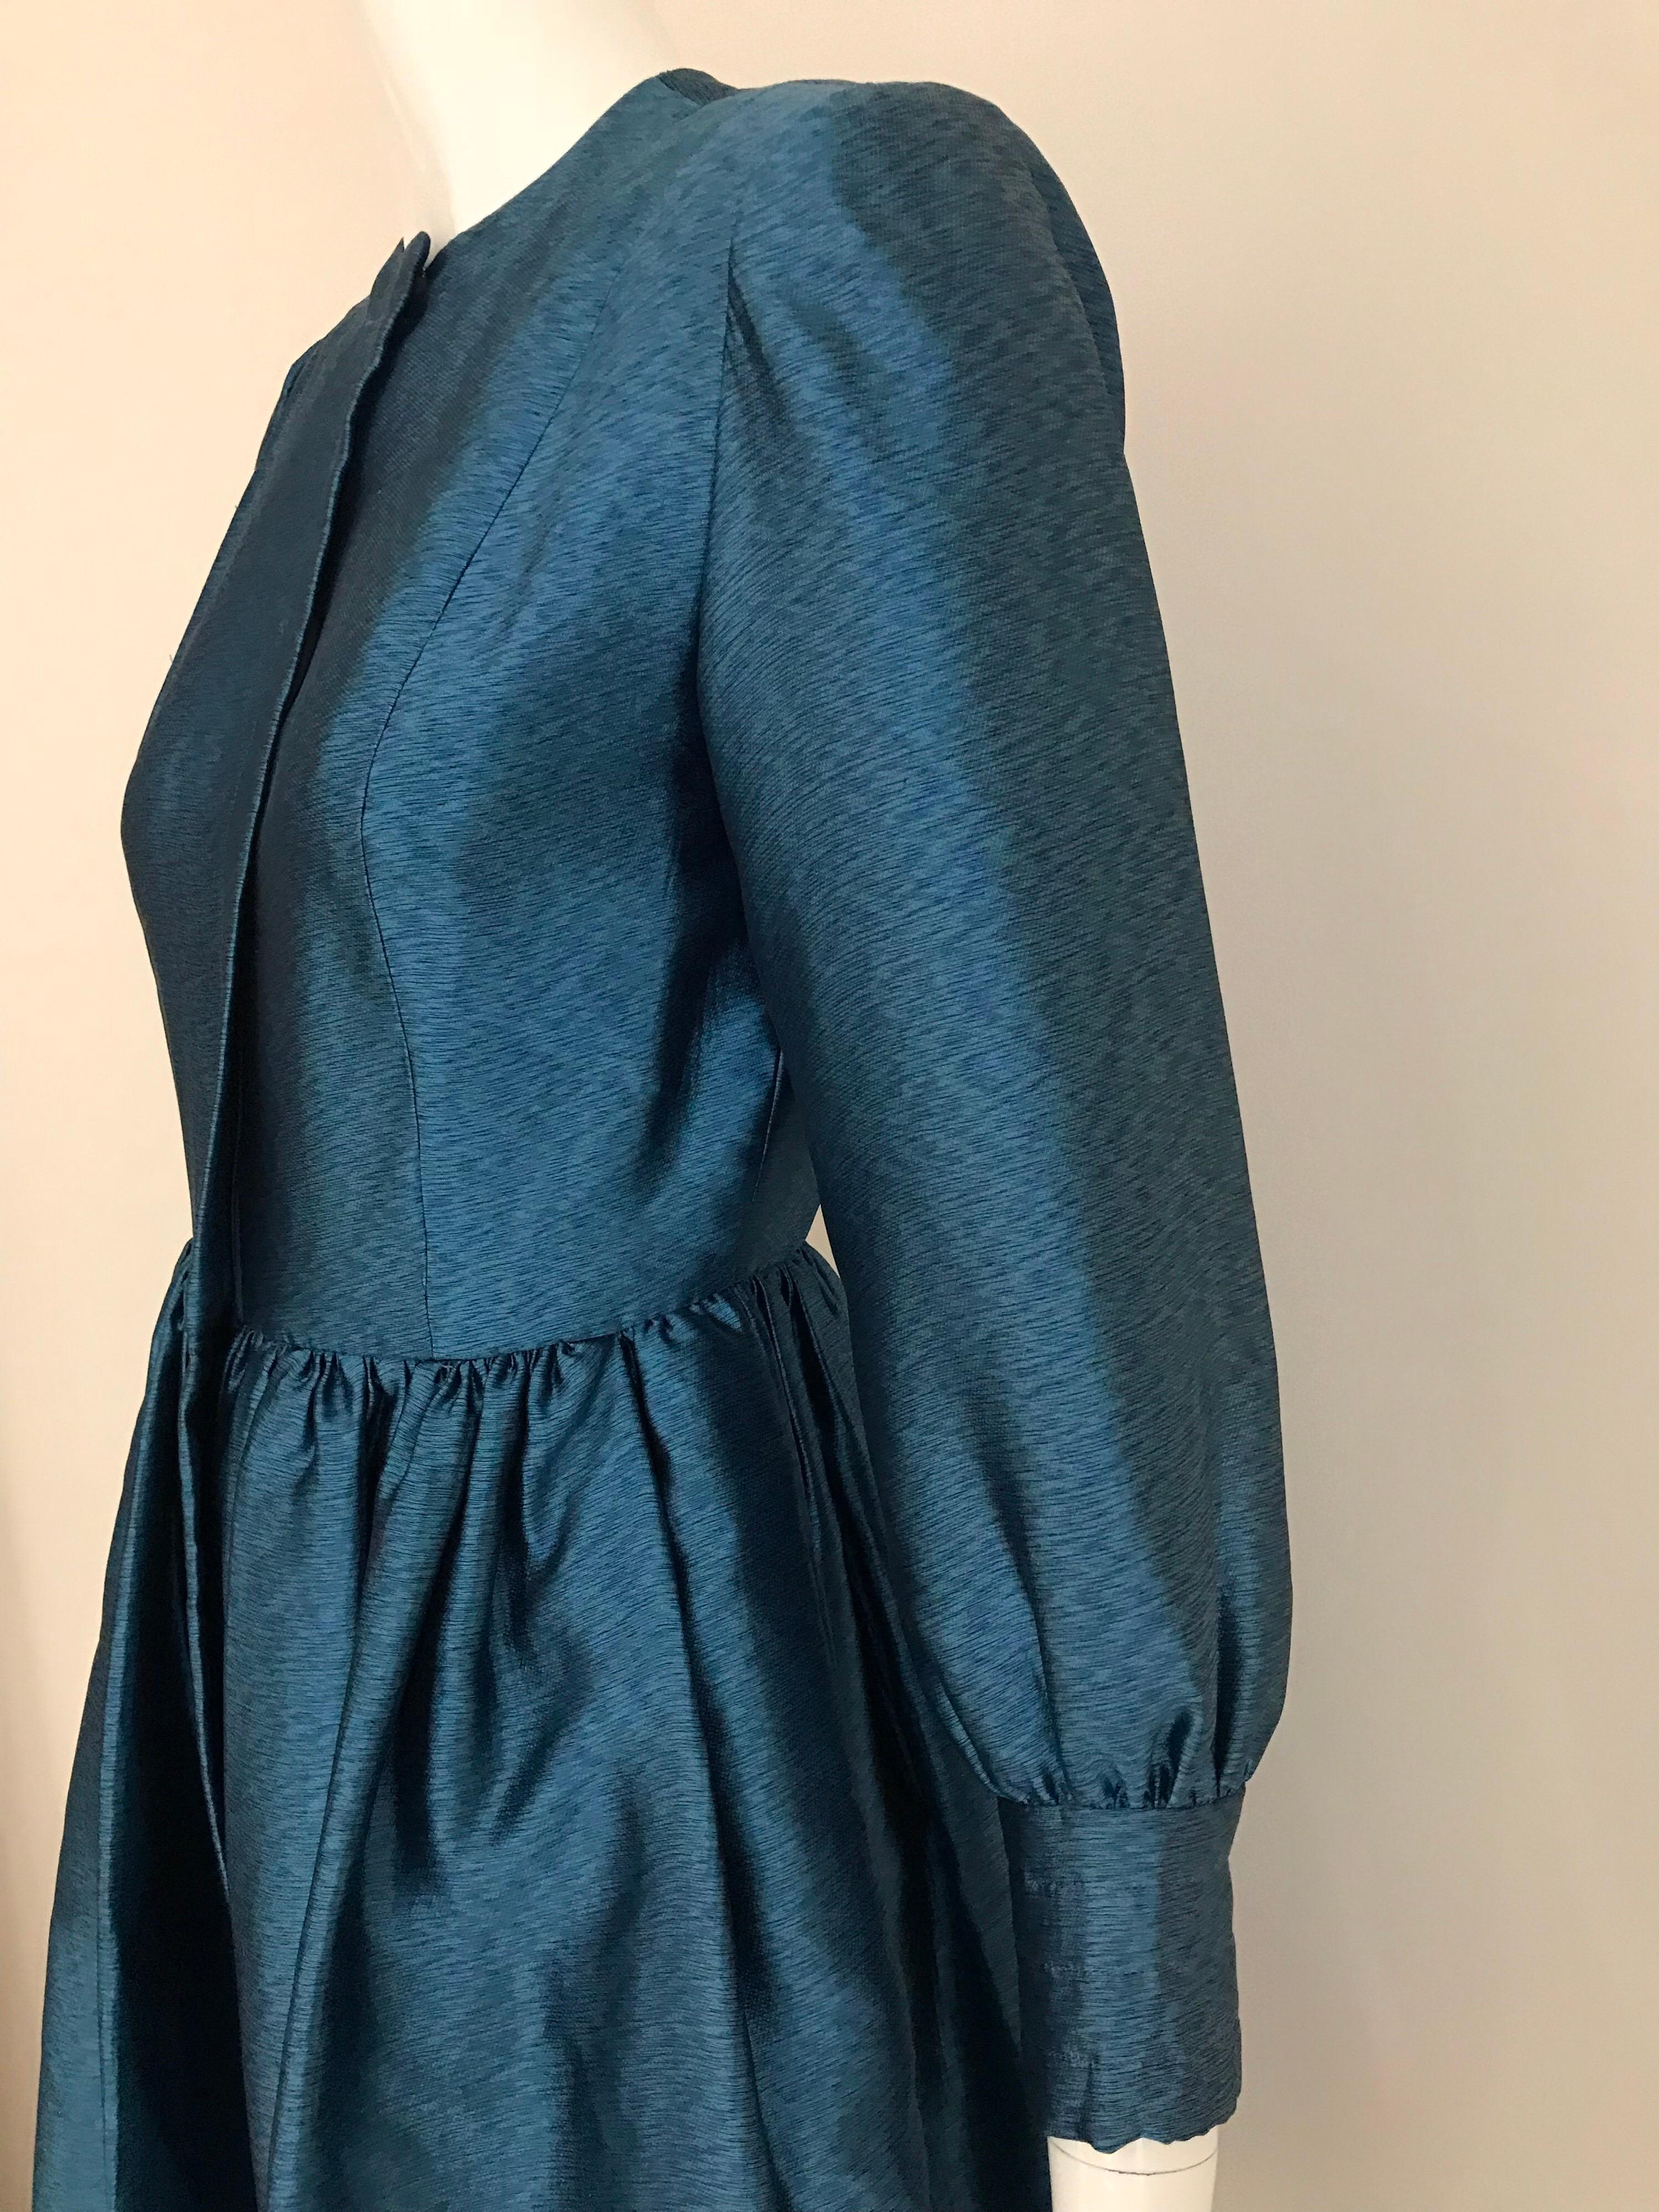 Vintage Geoffrey Beene Teal Blue Silk Dress  In Good Condition For Sale In Beverly Hills, CA